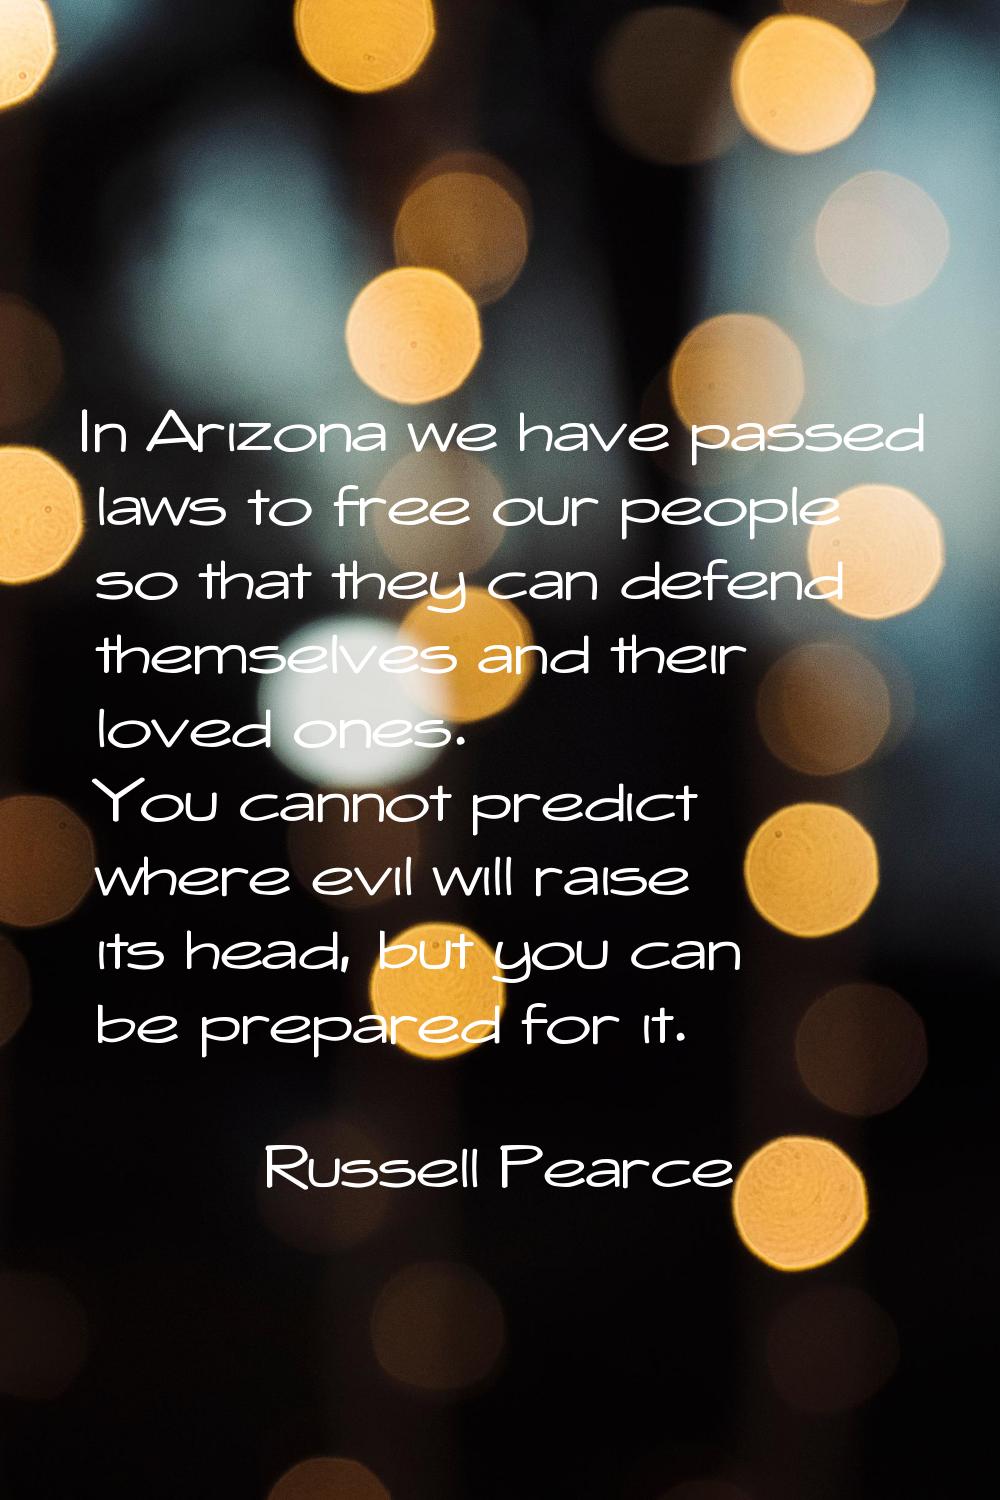 In Arizona we have passed laws to free our people so that they can defend themselves and their love